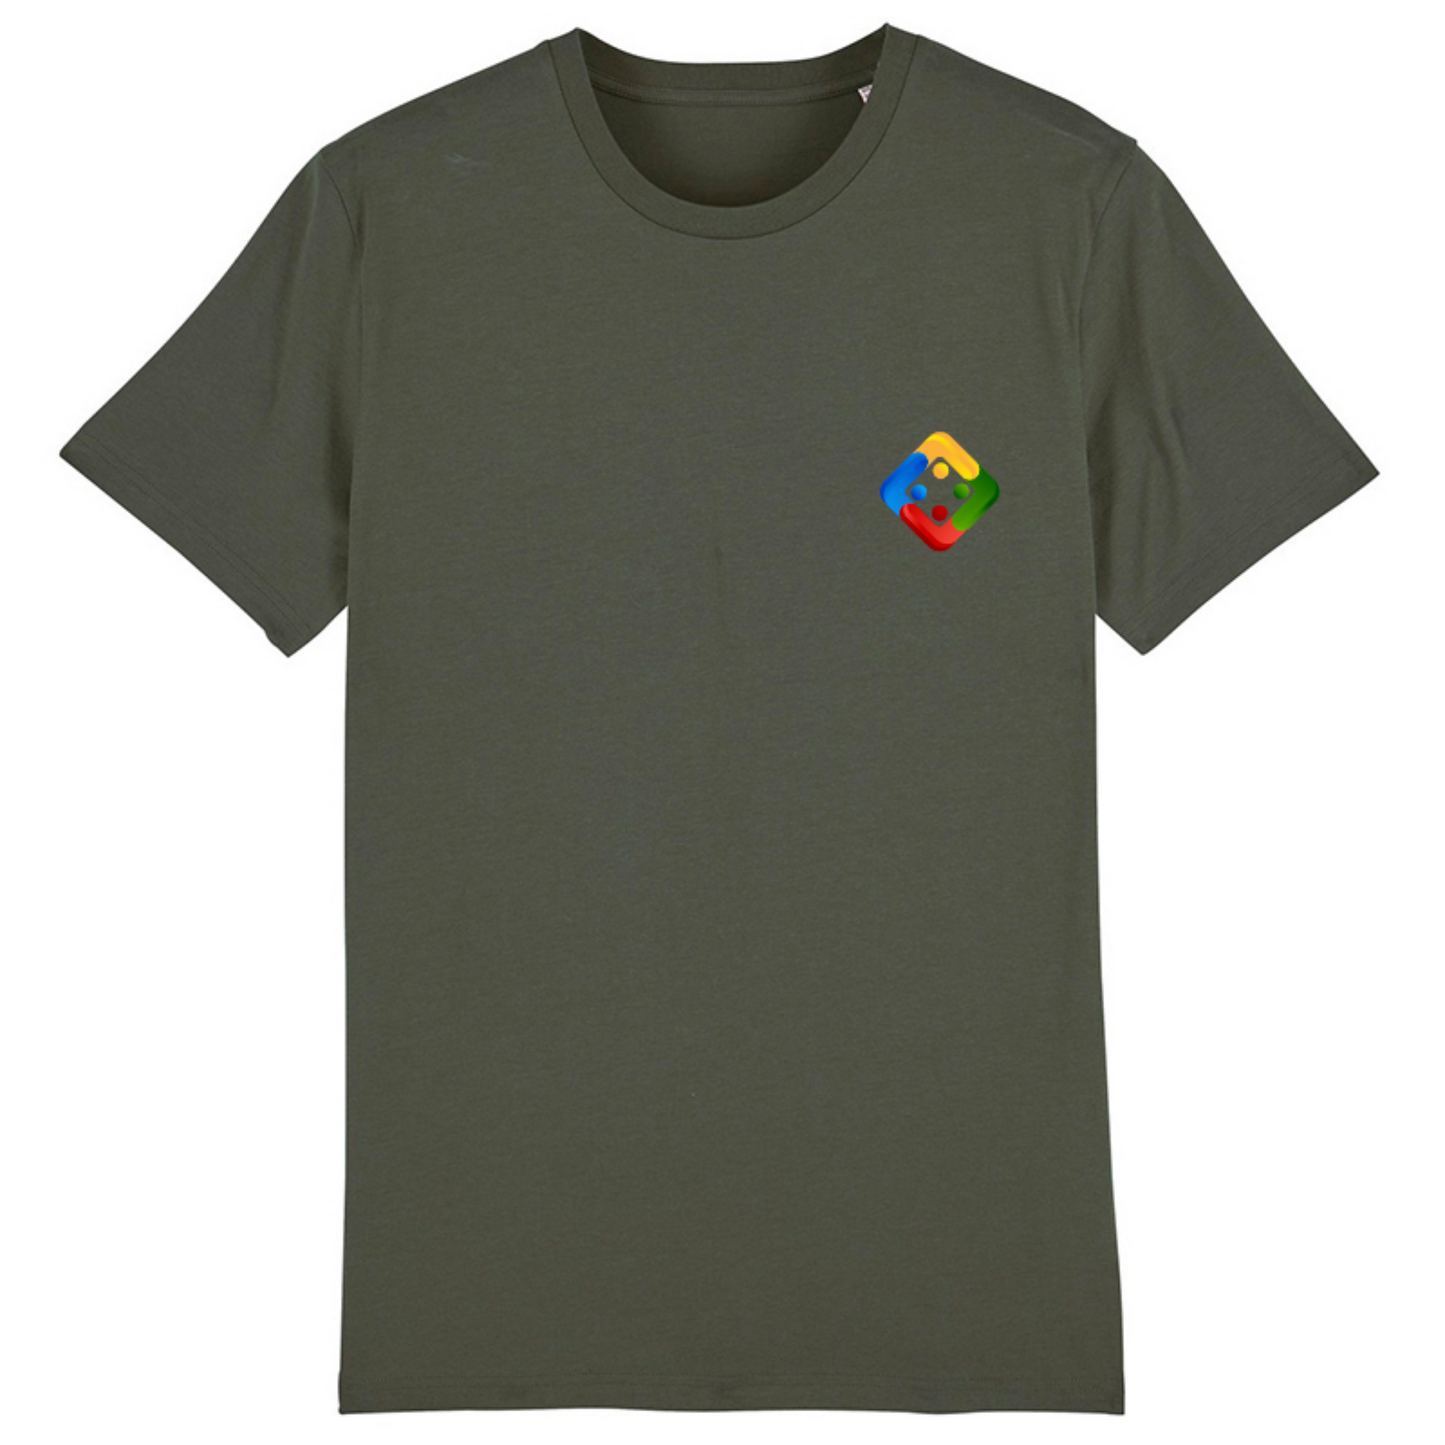 Unisex organic T-shirt in dark colours with embroidered small Uckers emblem. Available in 10 colours.